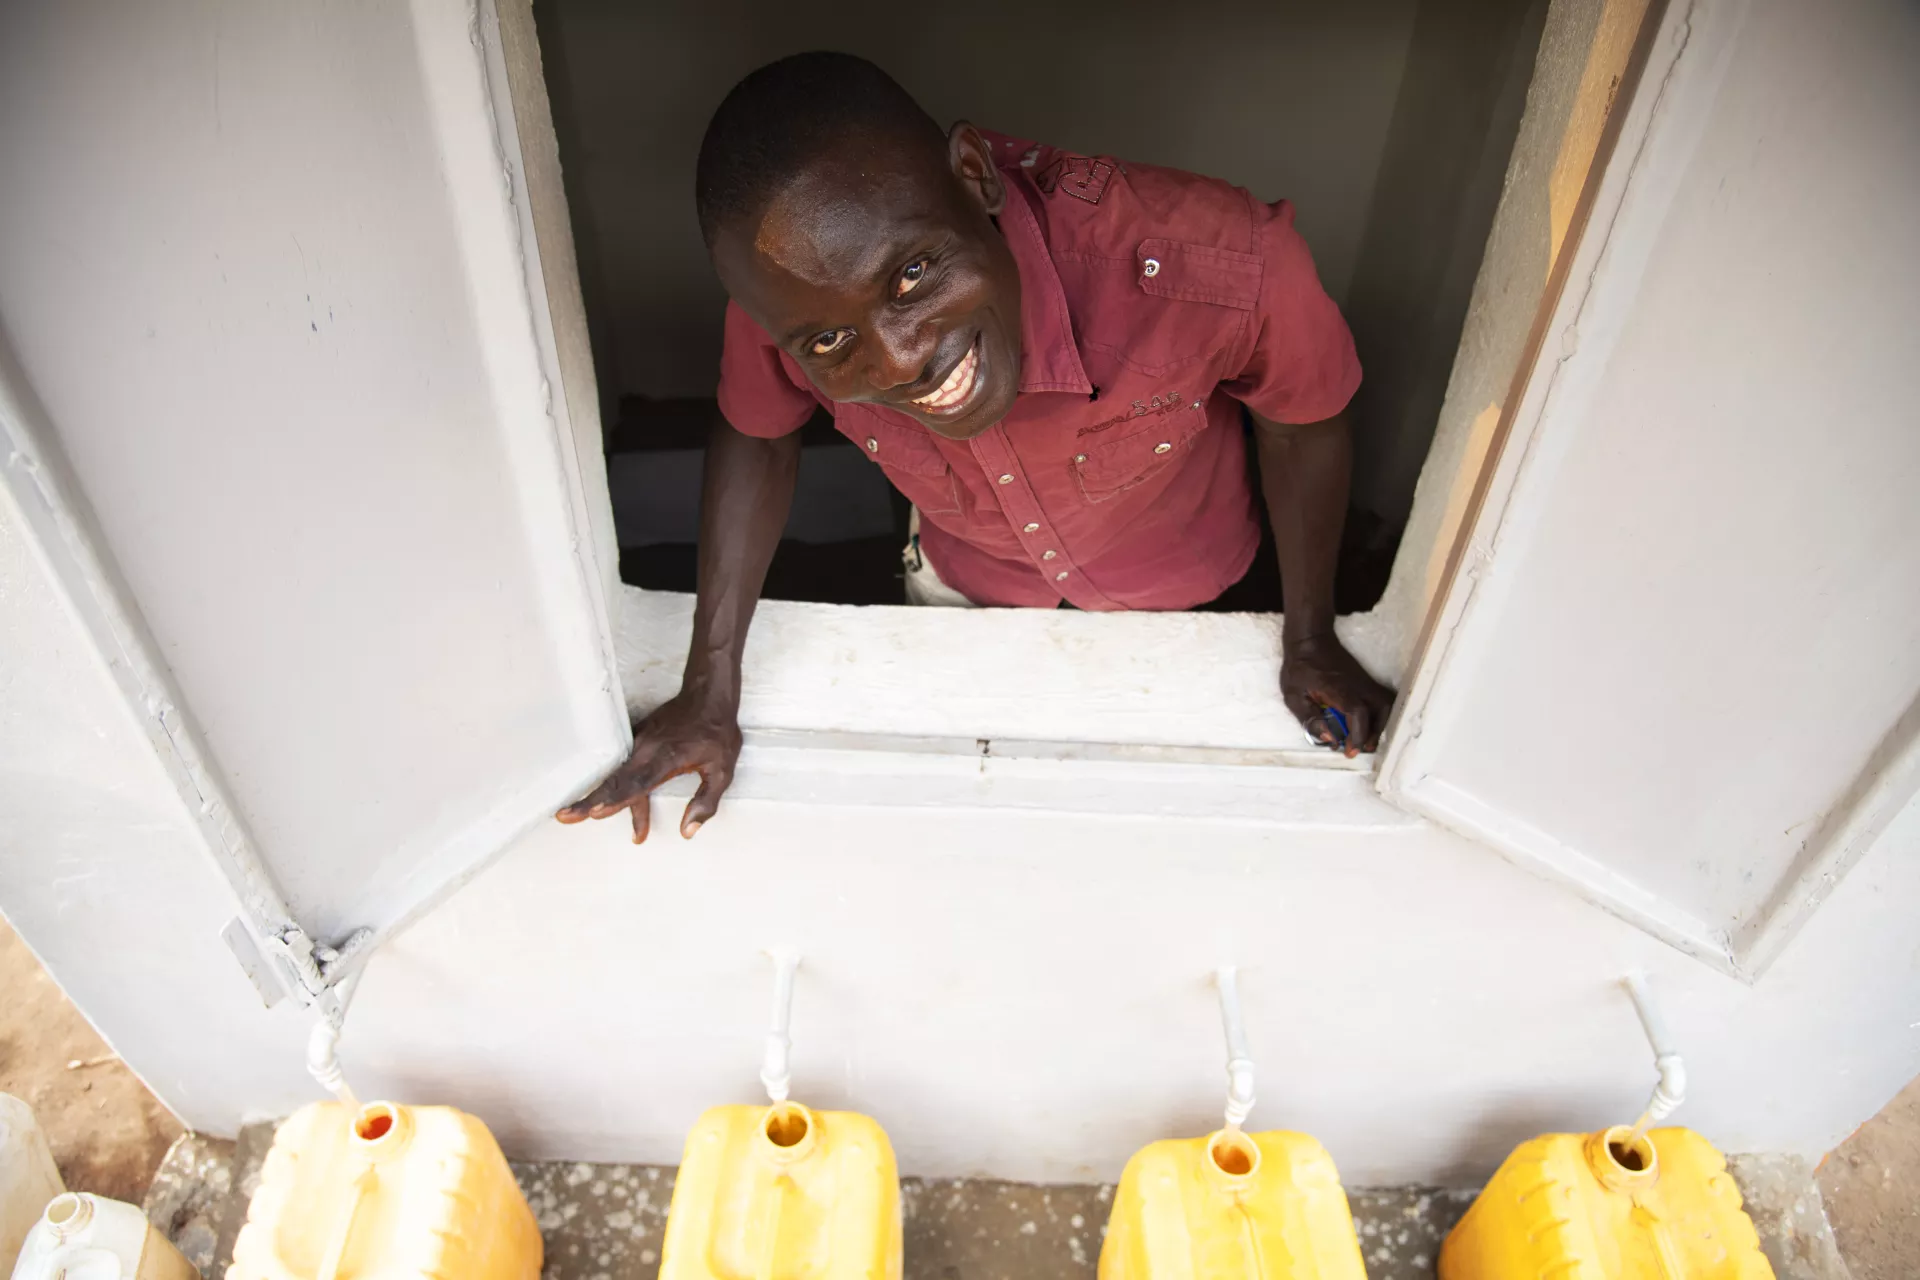 In South Sudan, UNICEF transformed an unprotected spring into a safe water source through the construction of a reservoir and treatment system and used solar systems to pump the water to tapstands, where the water is collected safely. 